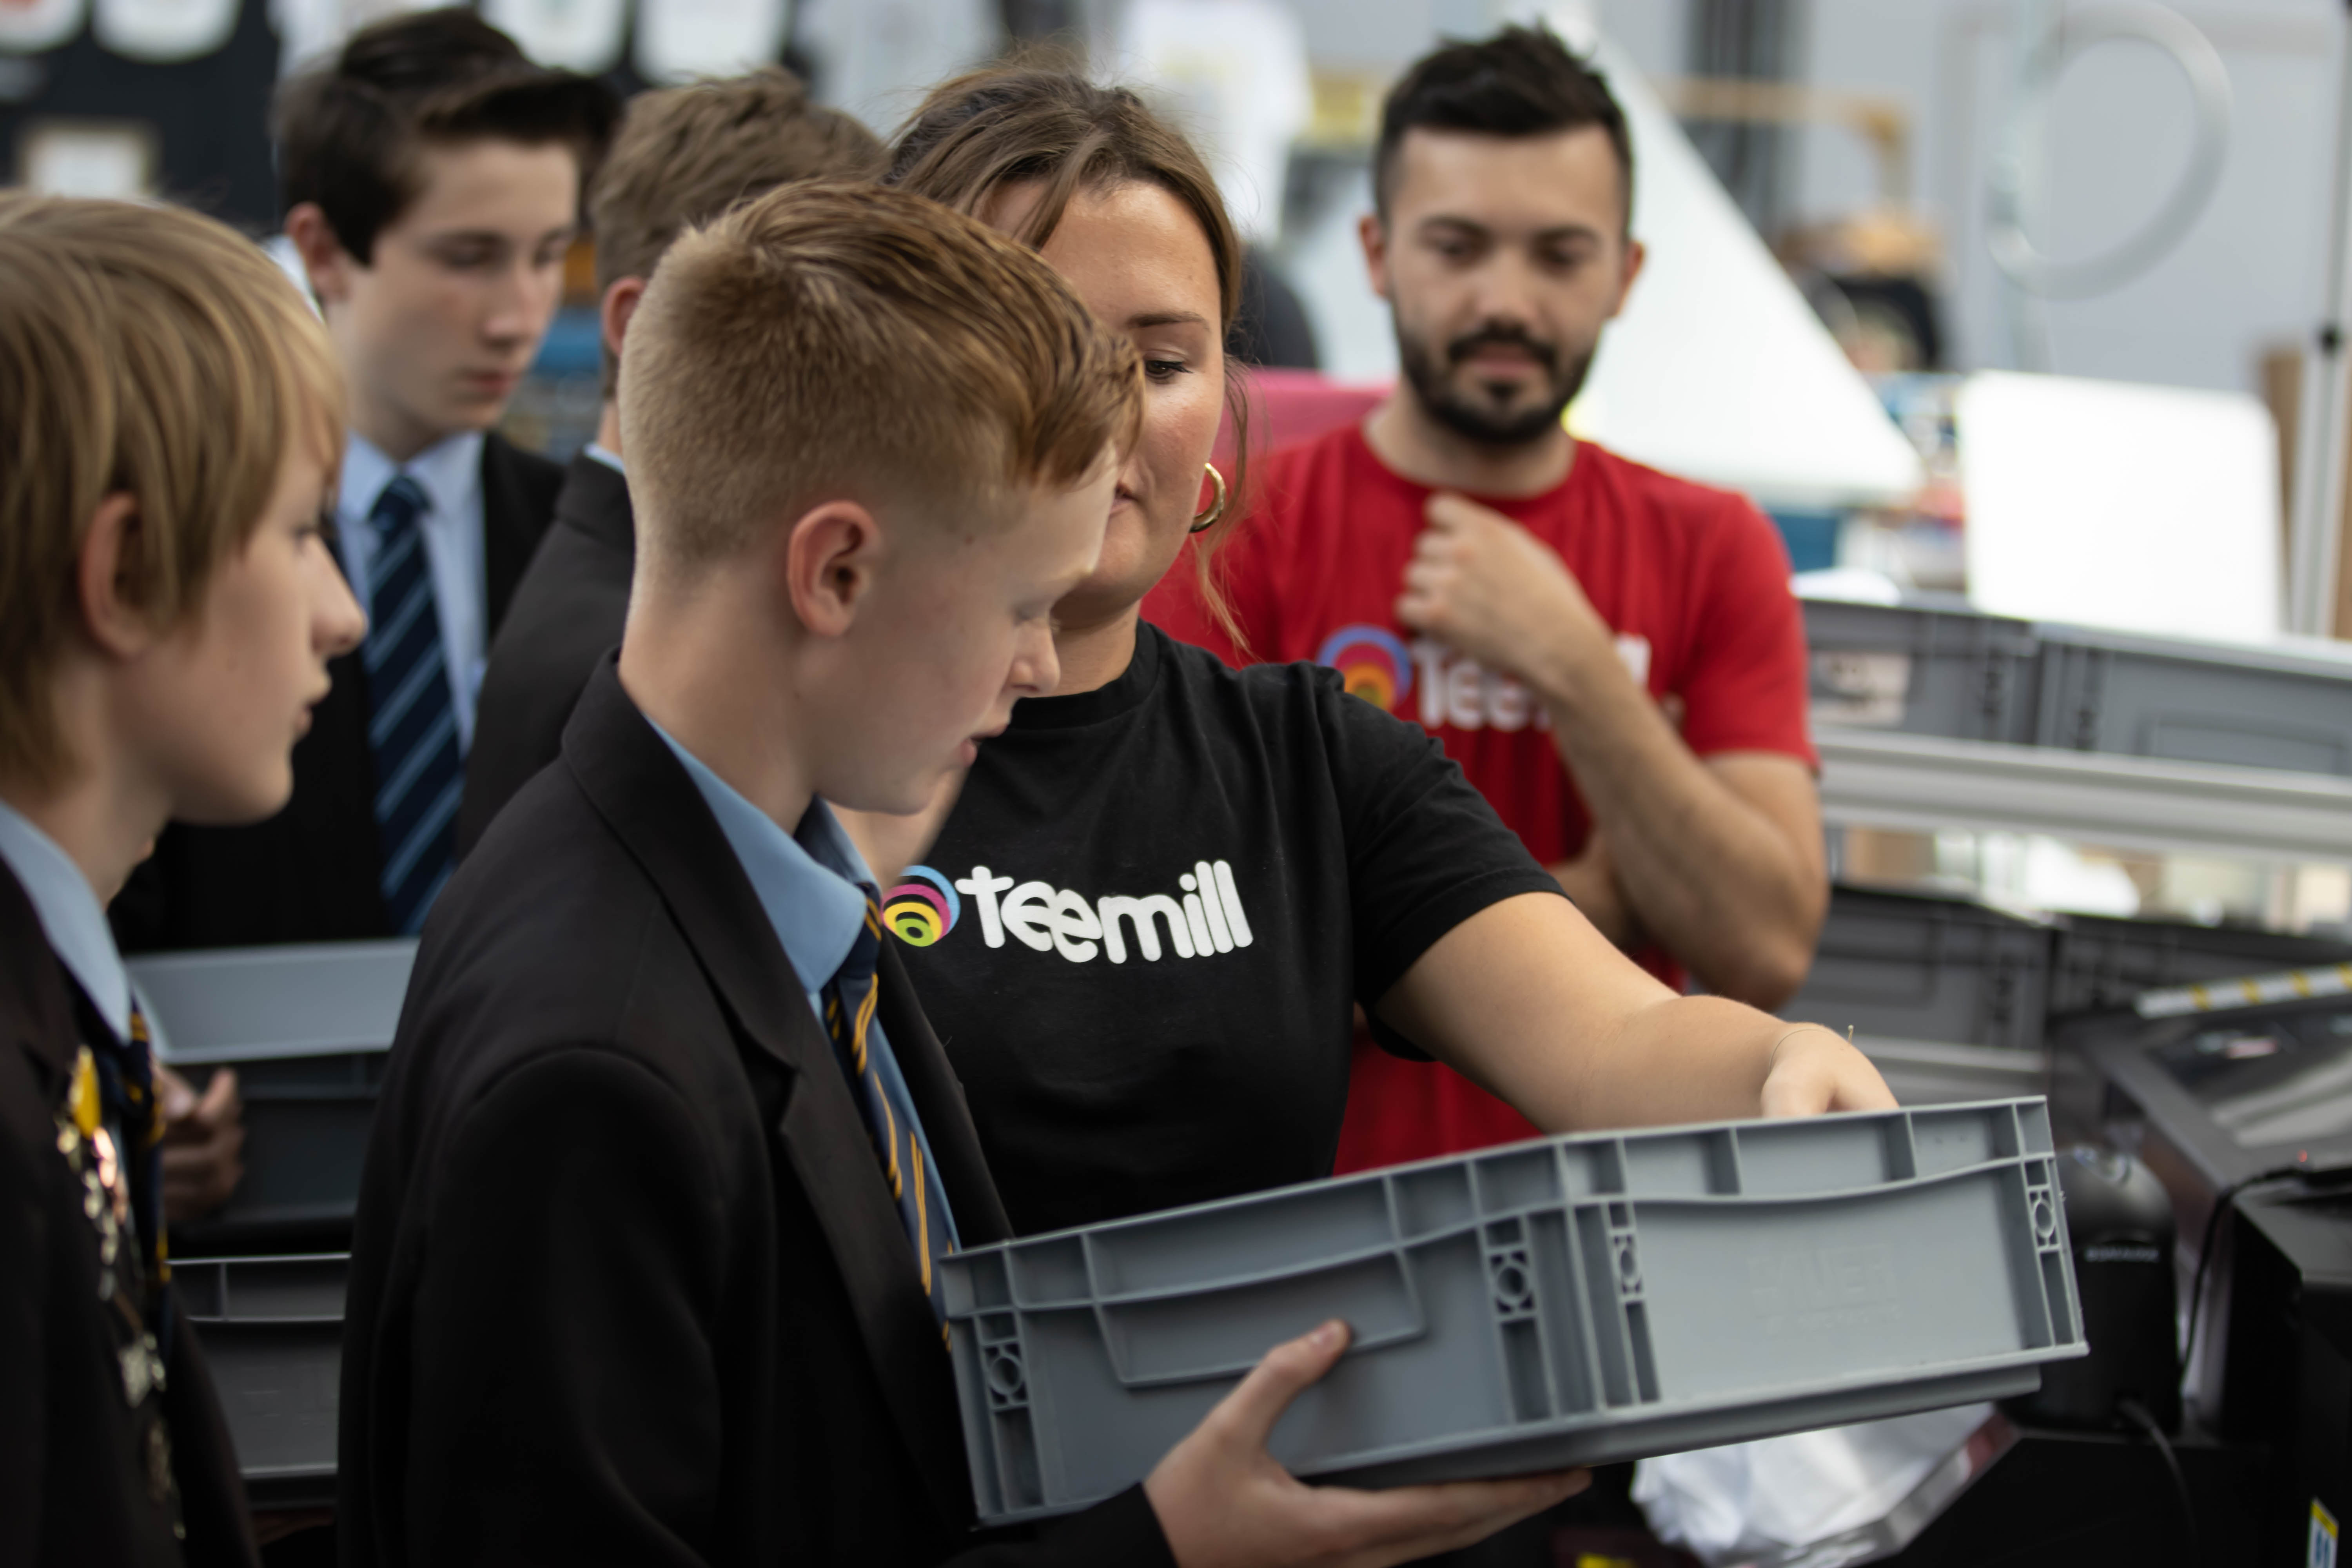 Photo of Teemill staff and pupils in the Teemill factory. A Teemill operative is holding a grey crate, showing it to one of the pupils.